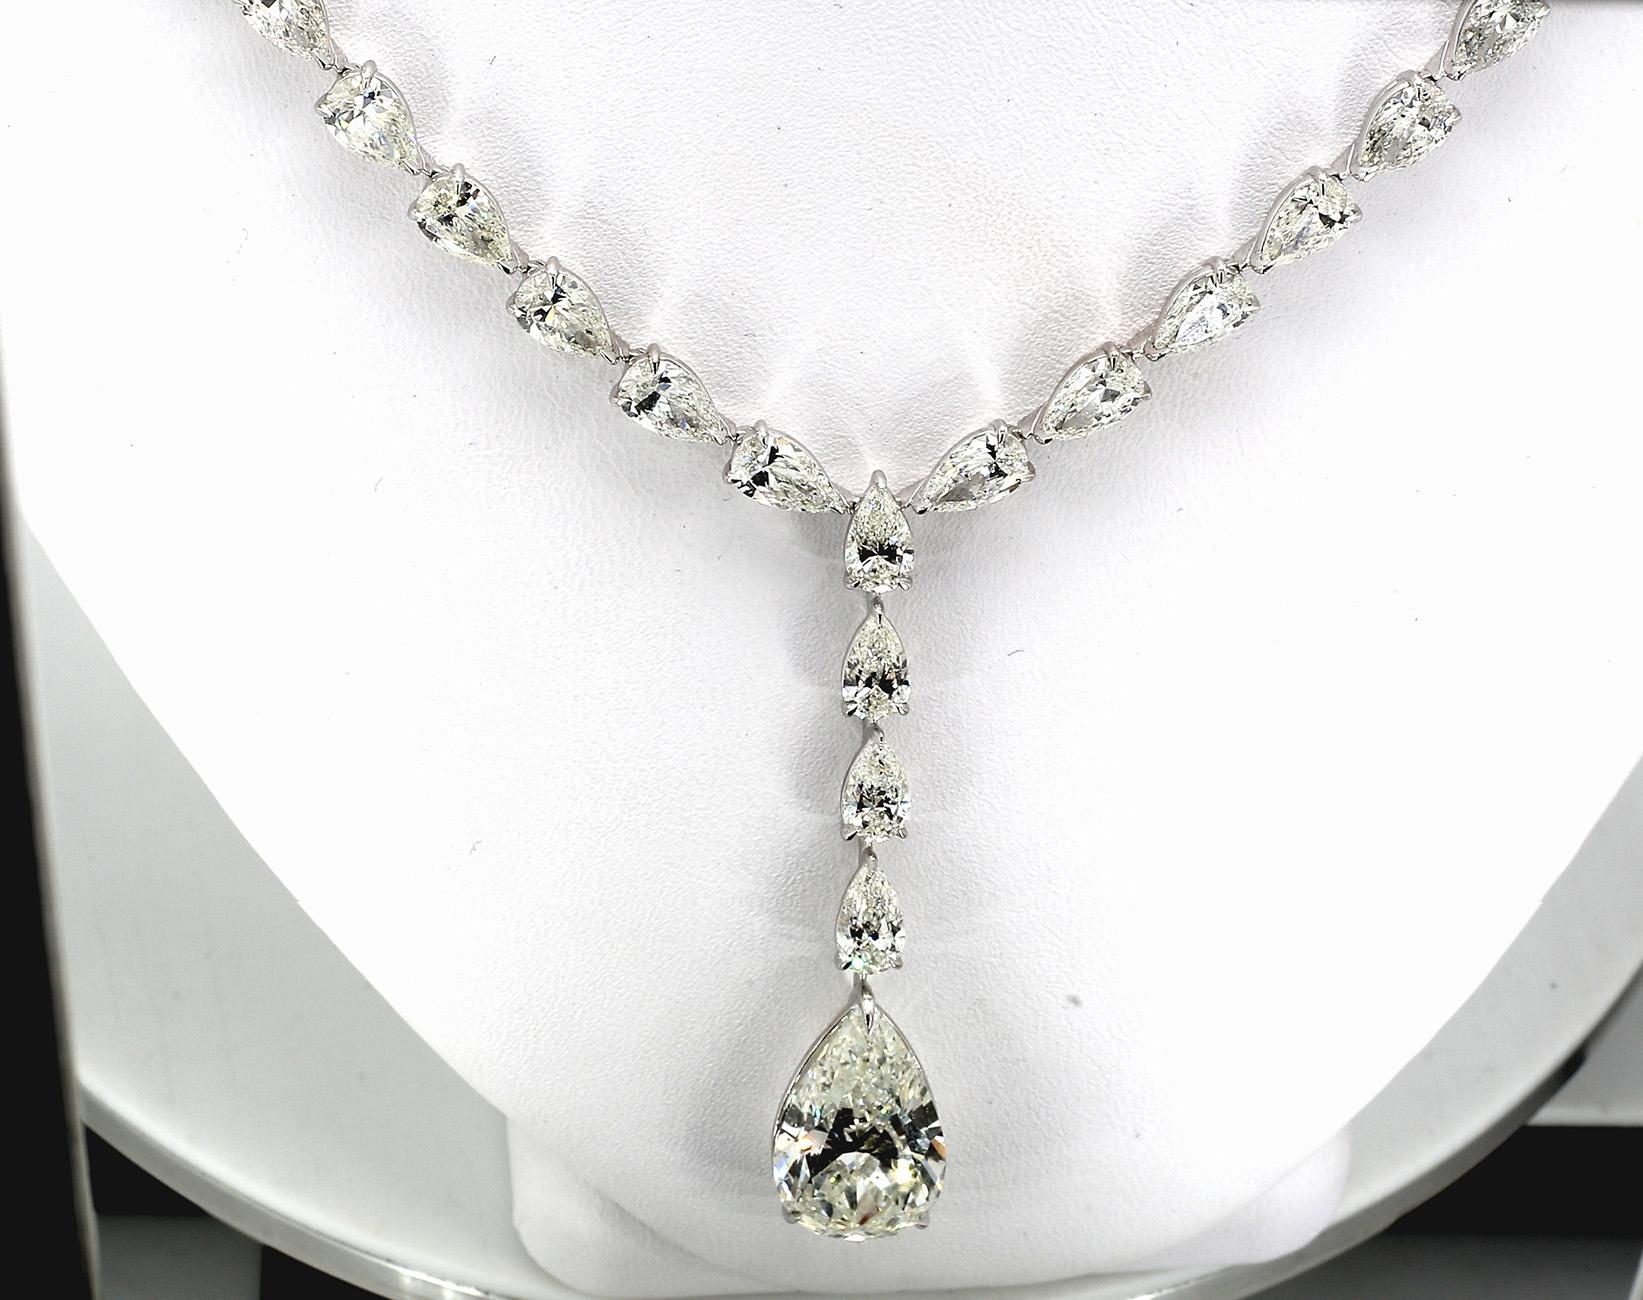 Dangling tennis necklace in platinum with basket prong set pear shape diamonds (55 stones) and drop dangling GIA certified J/SI2 pear shape diamond center stone.  D36.13ct.t.w. - Center 8.02ct.